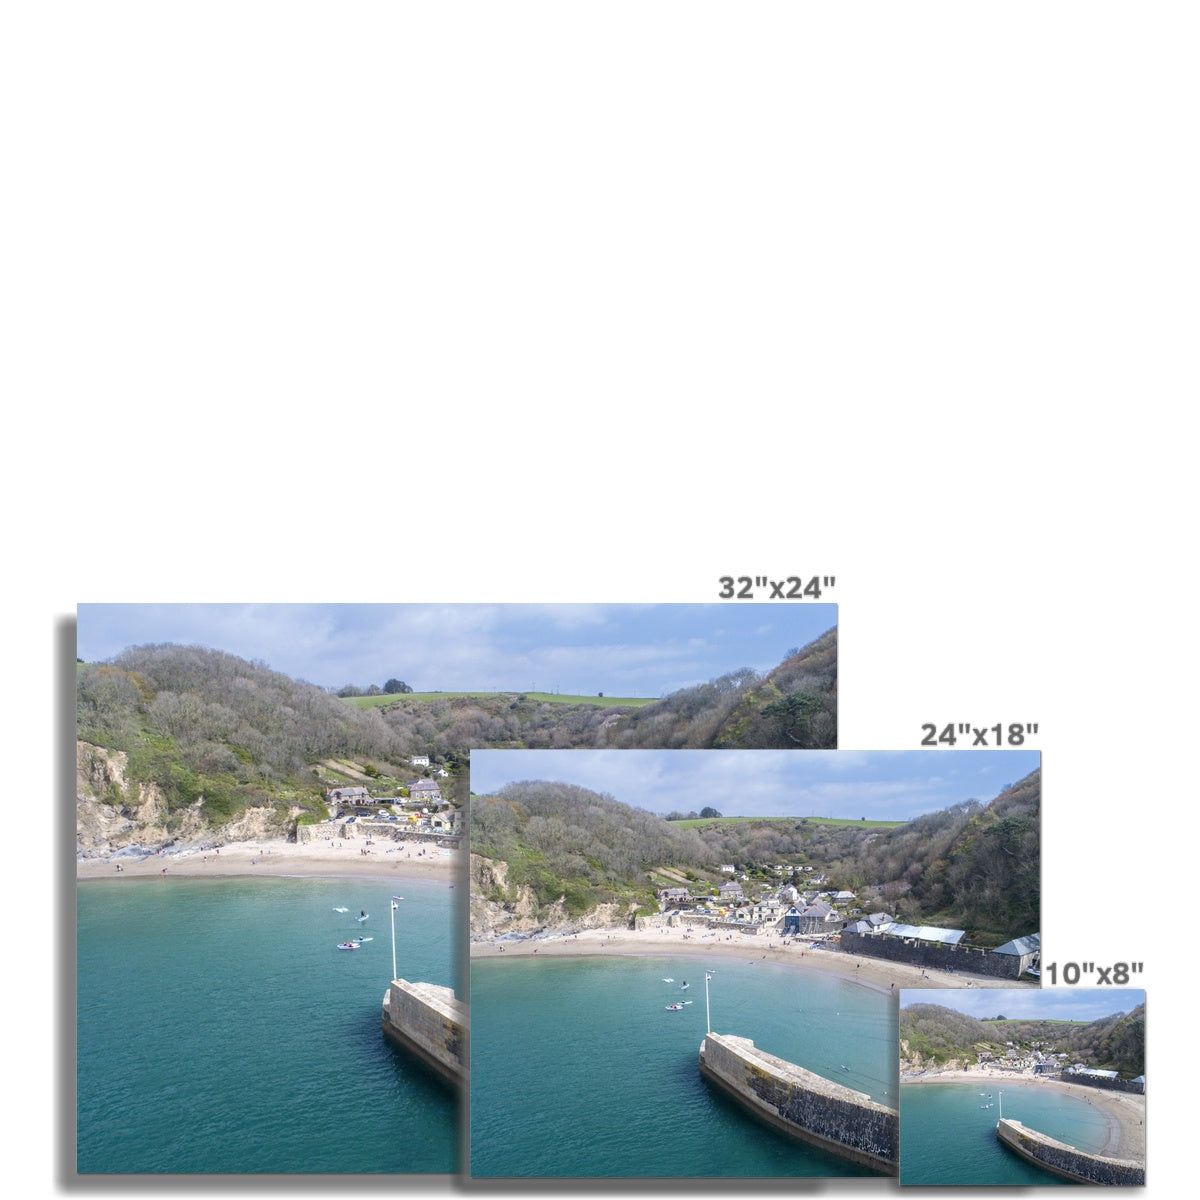 polkerris picture sizes